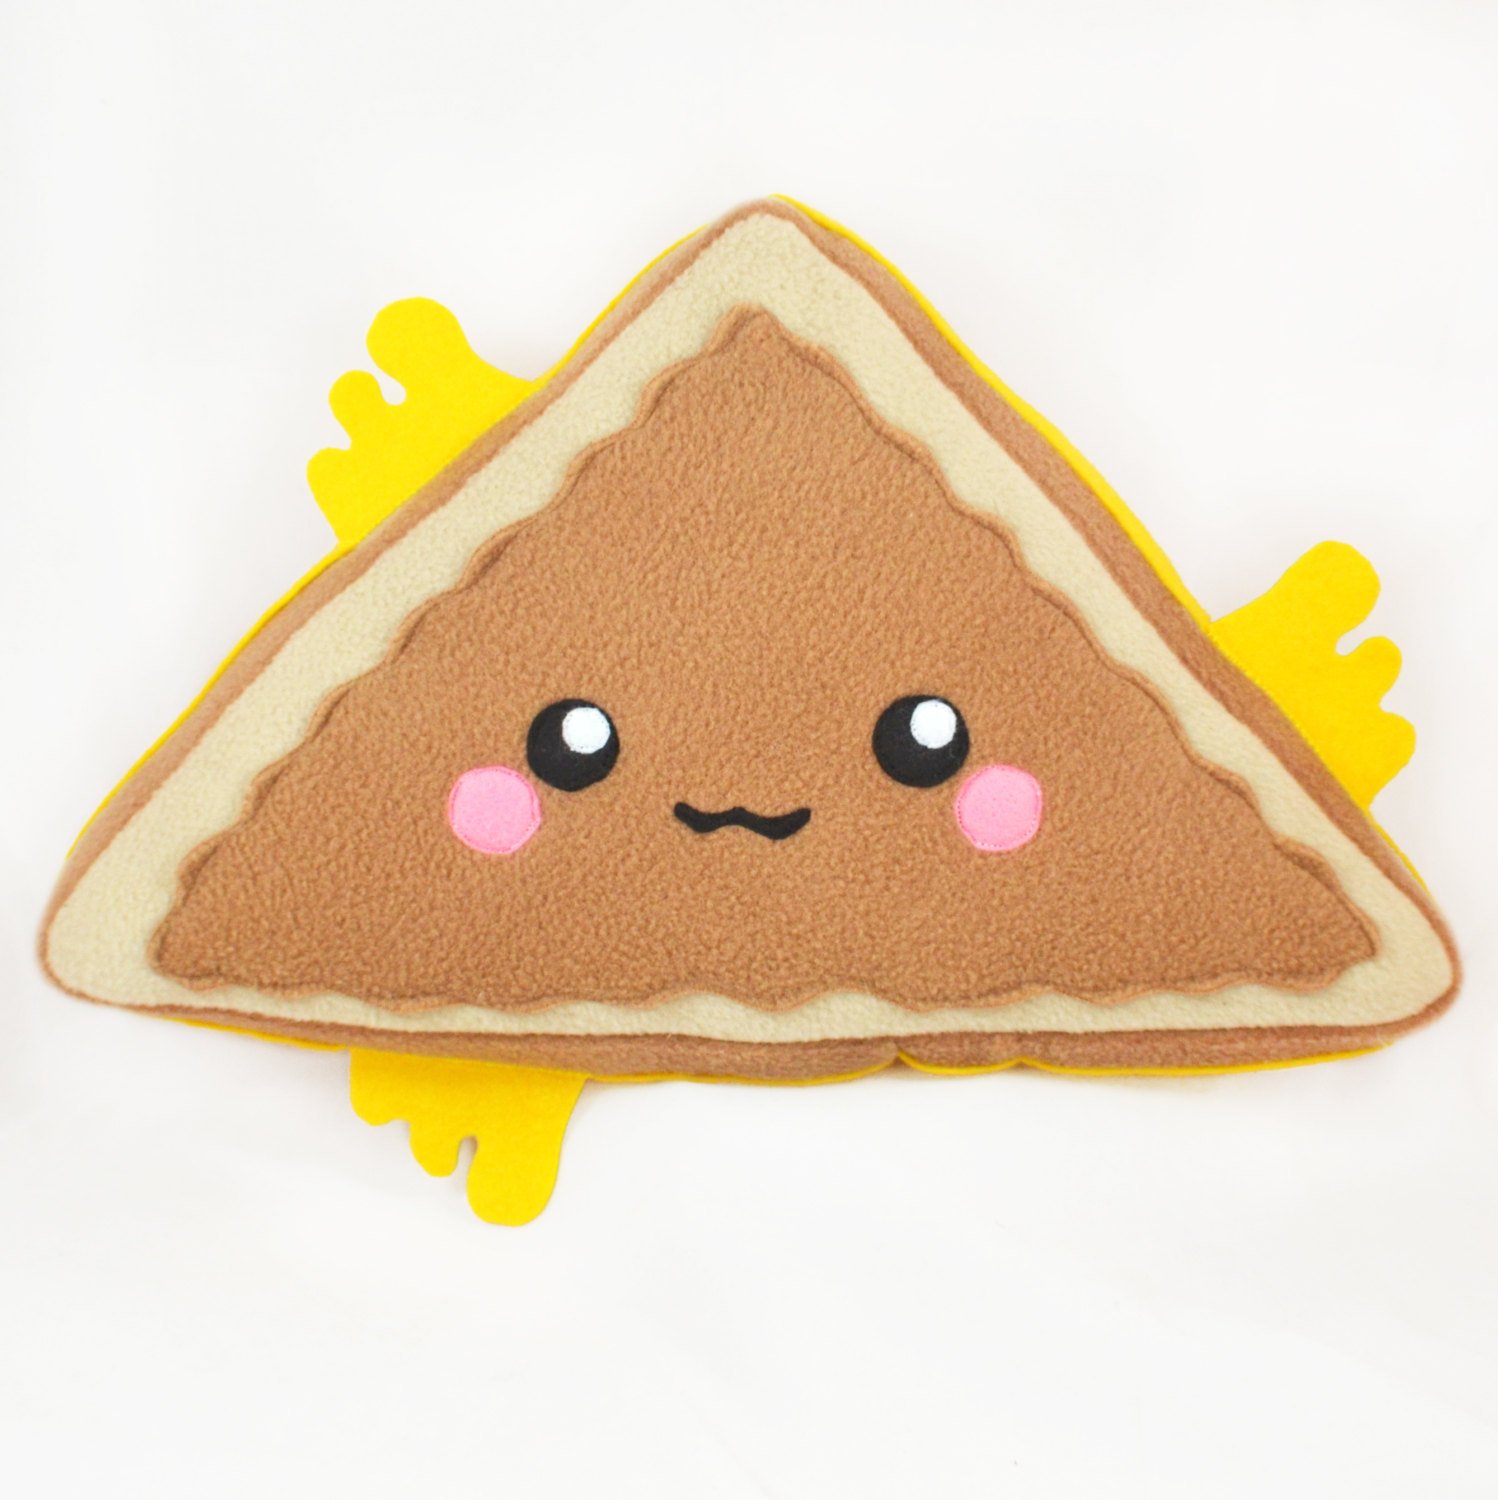 Grilled cheese sandwich triangle pillow / plush toy by Plusheez 